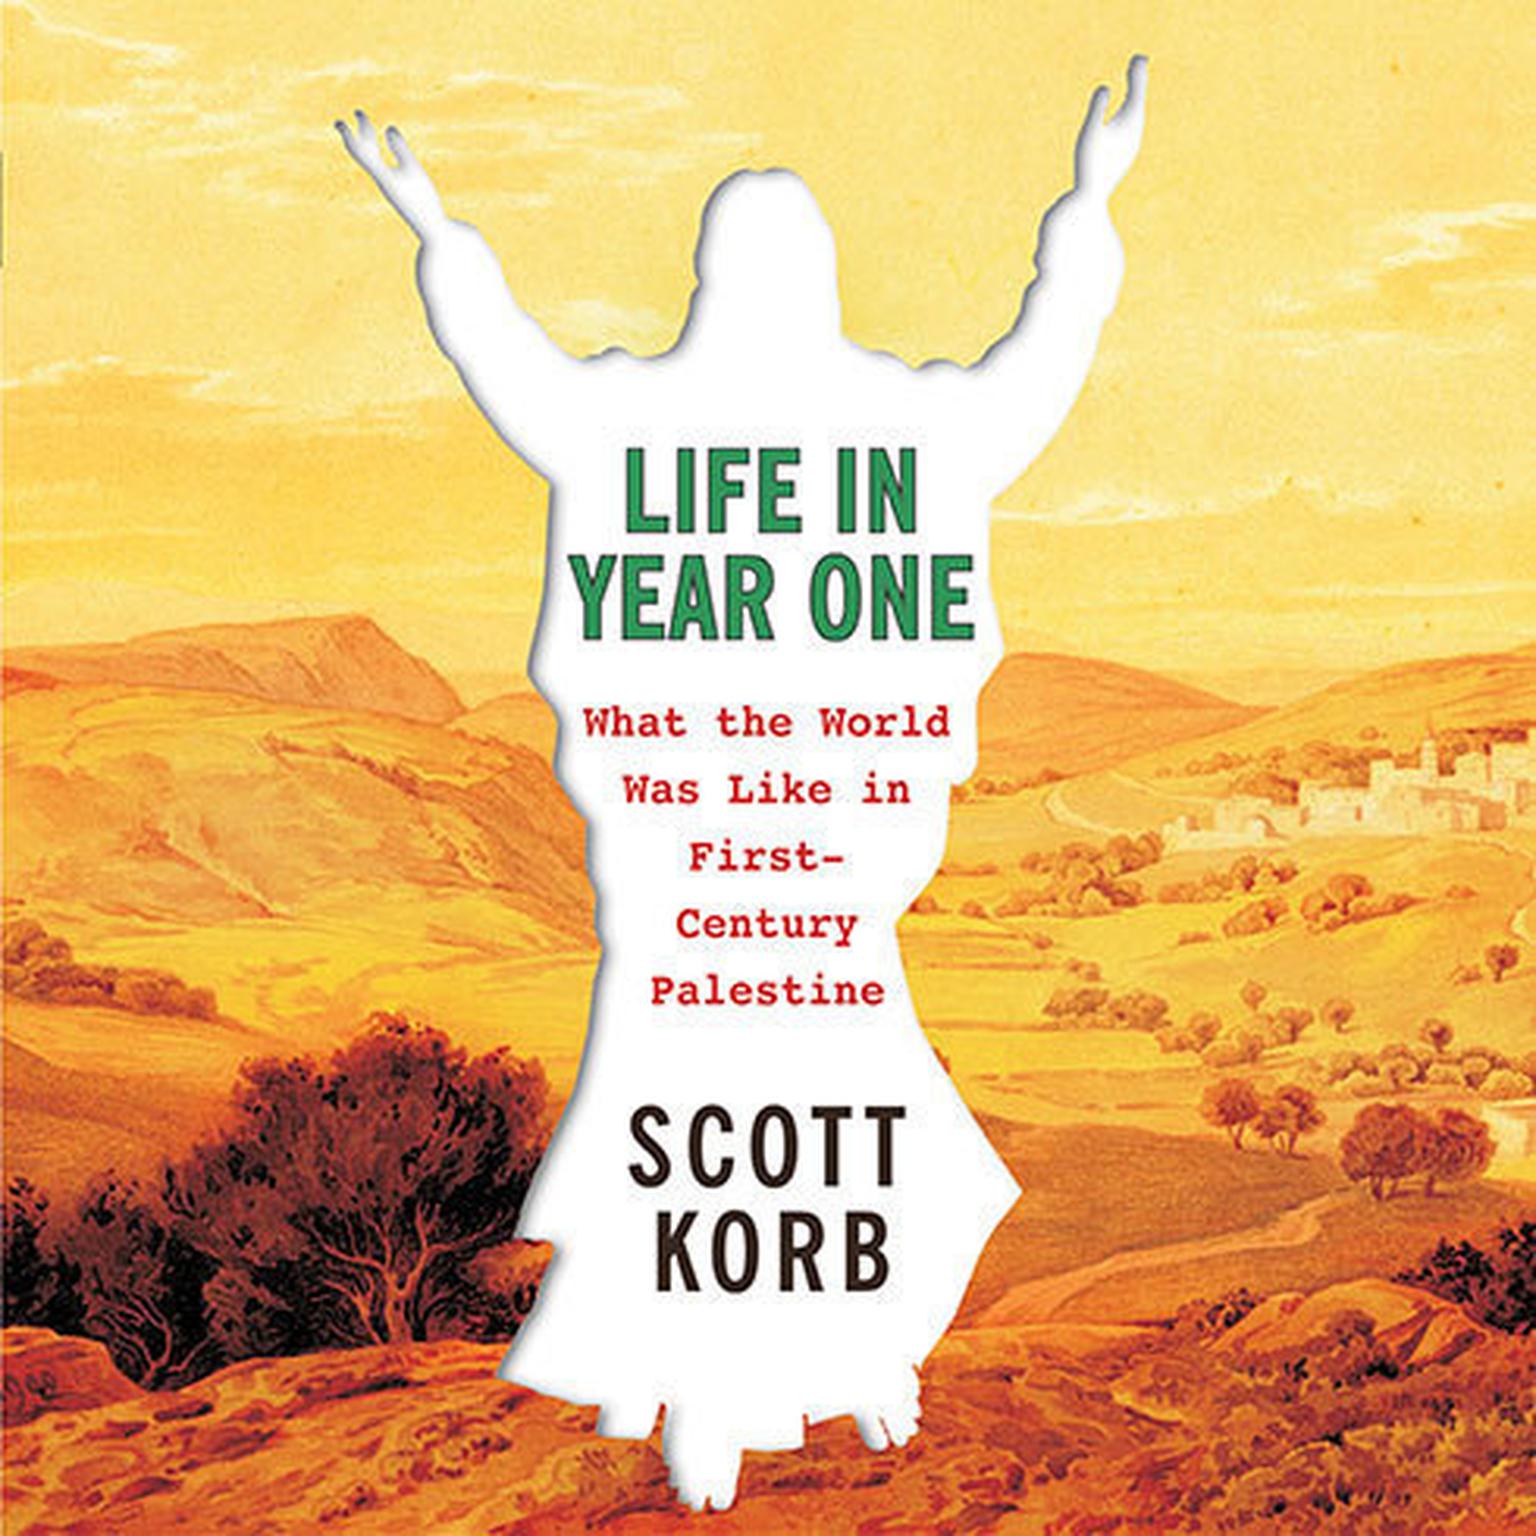 Life in Year One: What the World Was Like in First-Century Palestine Audiobook, by Scott Korb